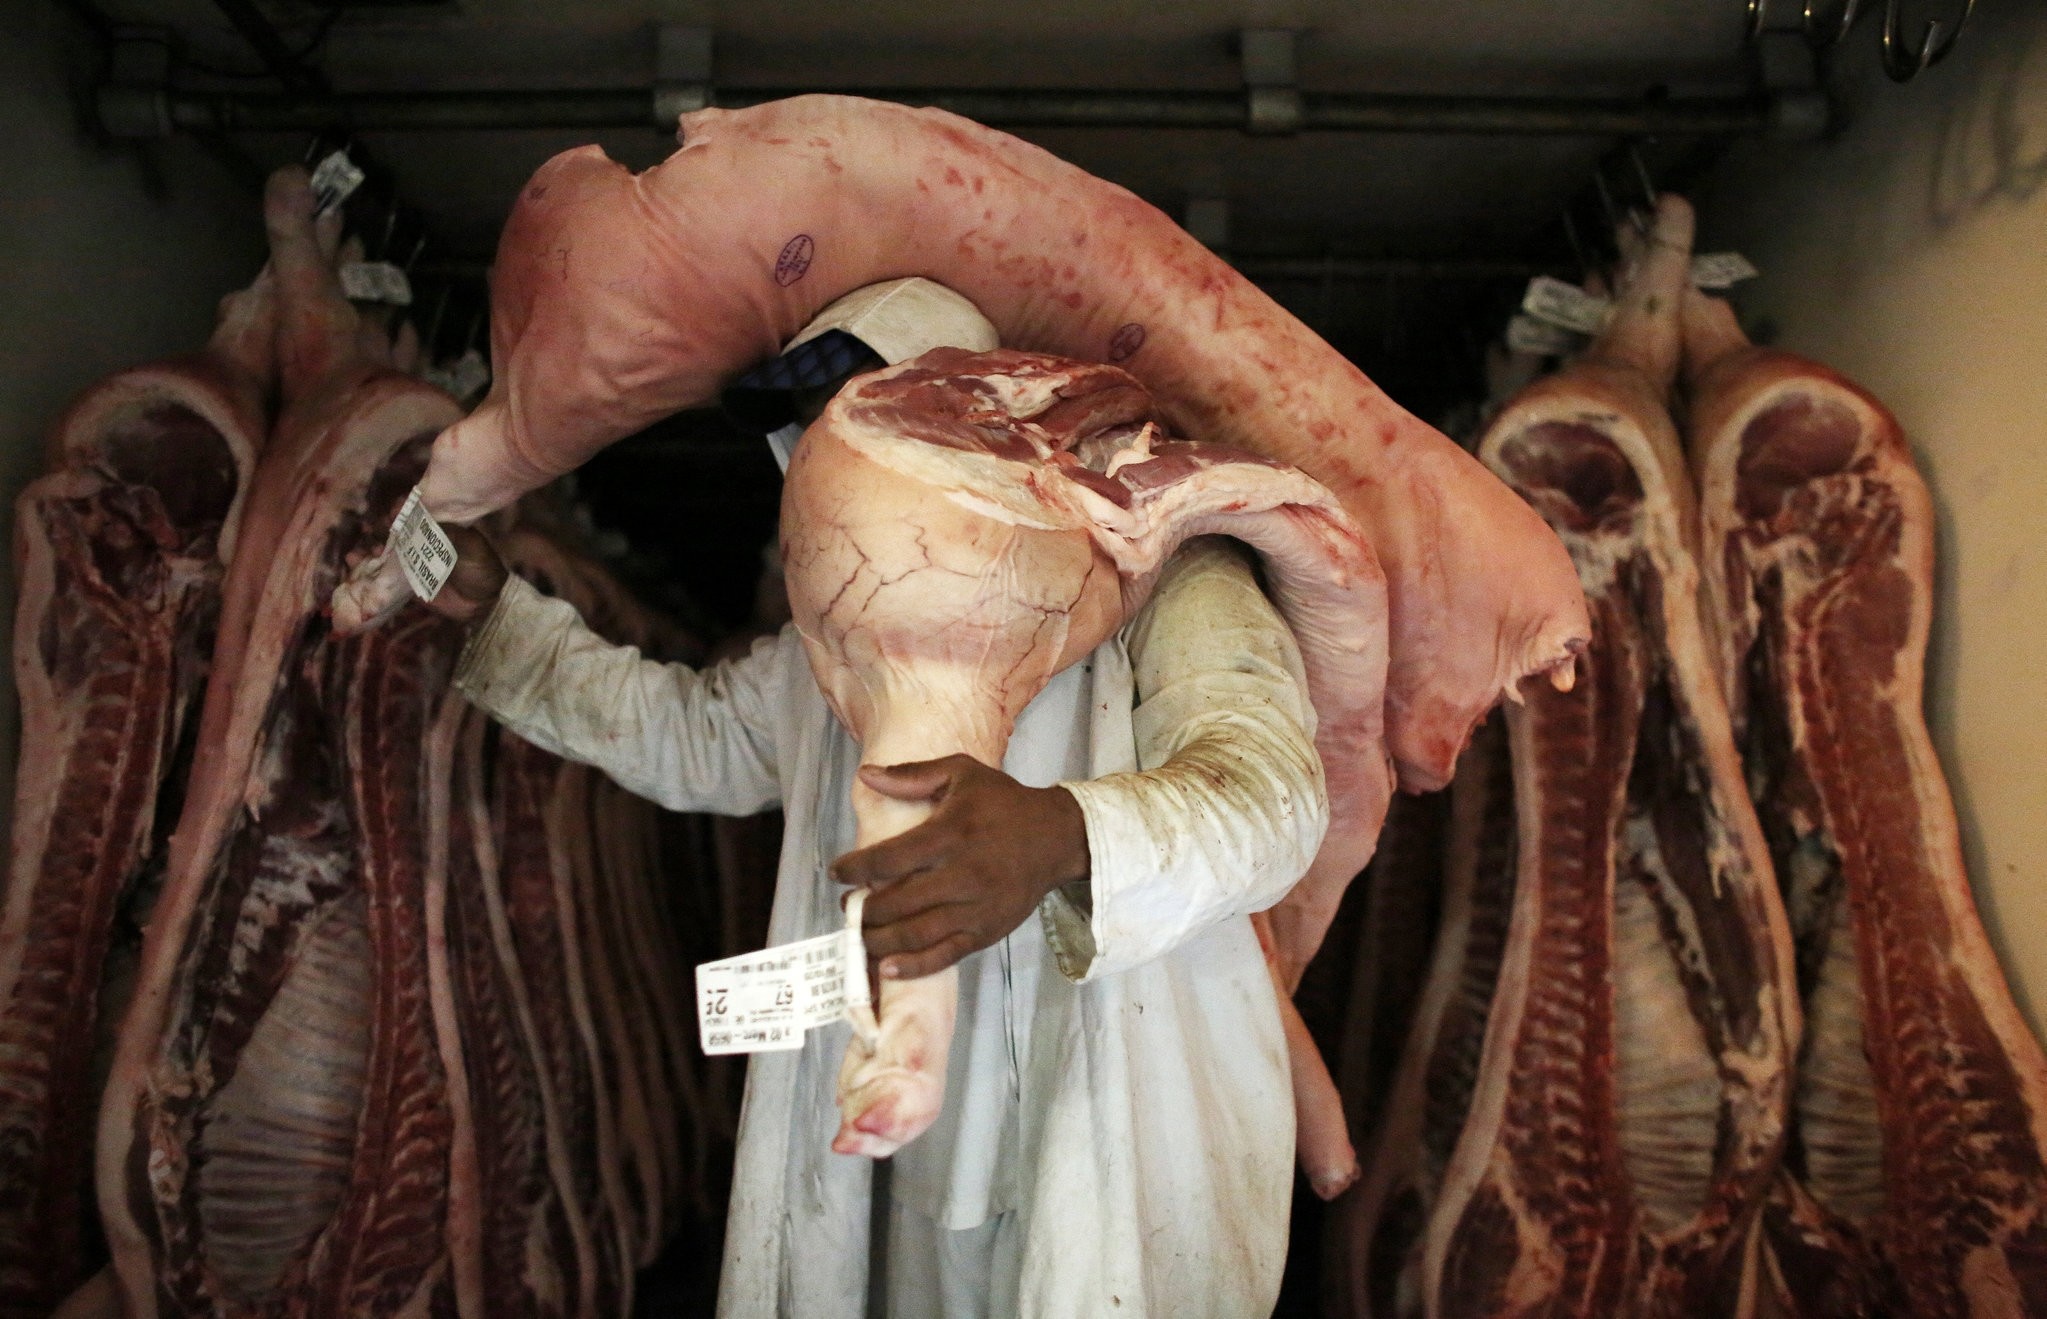 An employee carries pieces of meat at a butchery in Sao Paulo, Brazil October 10, 2014. Picture taken October 10, 2014. (REUTERS Photo)